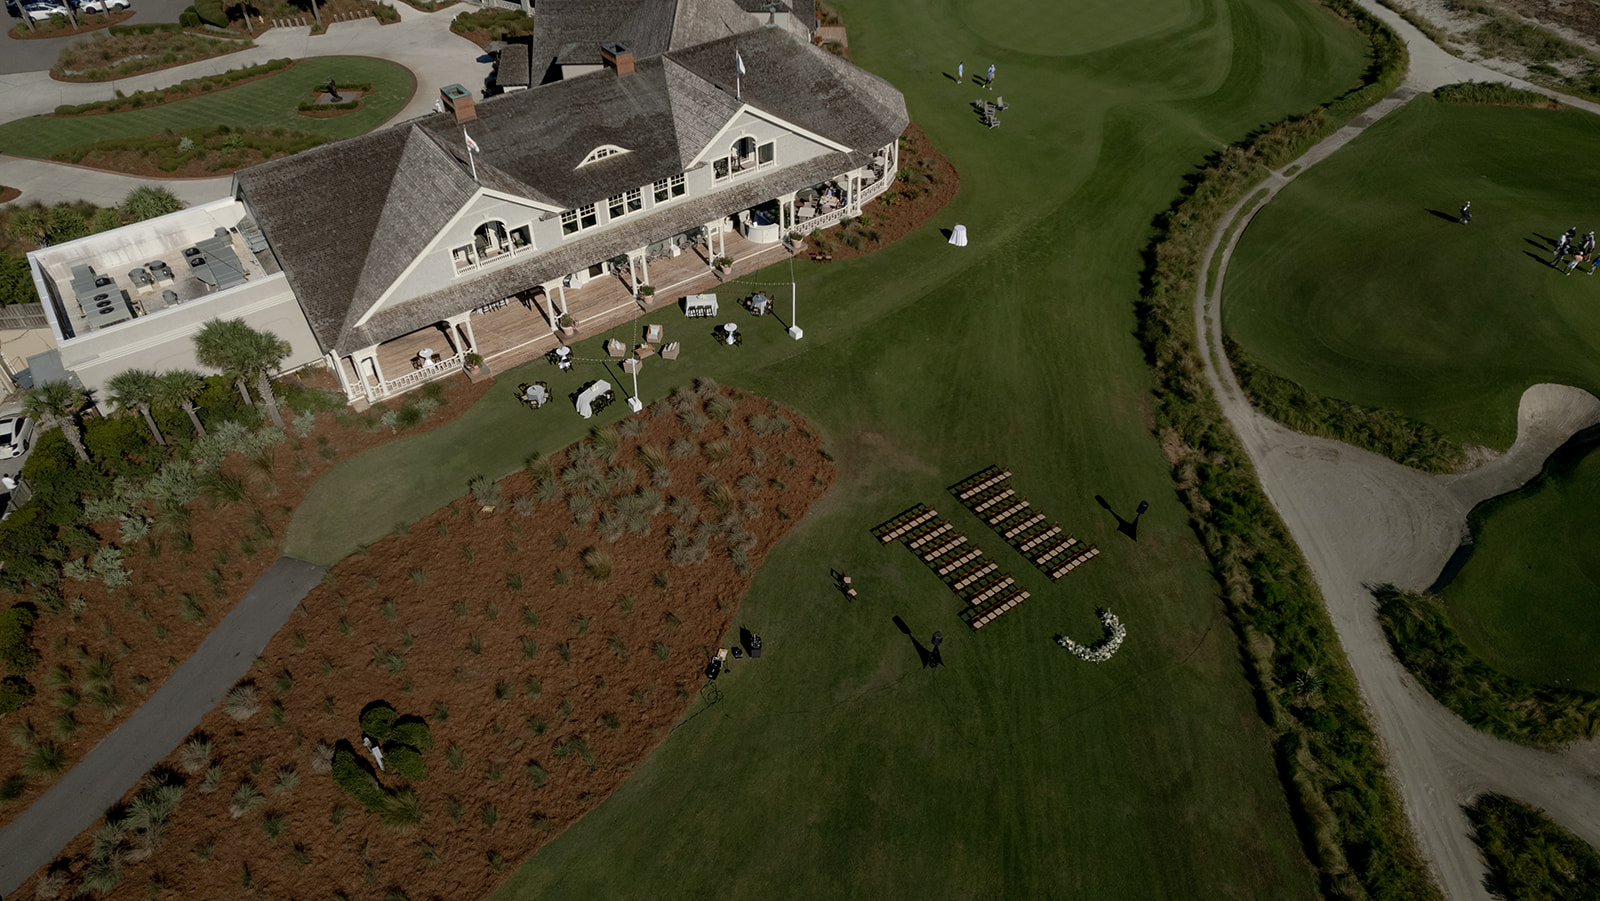 Kiawah Ocean Course wedding photographed with drone showing ceremony space and kiawah club house